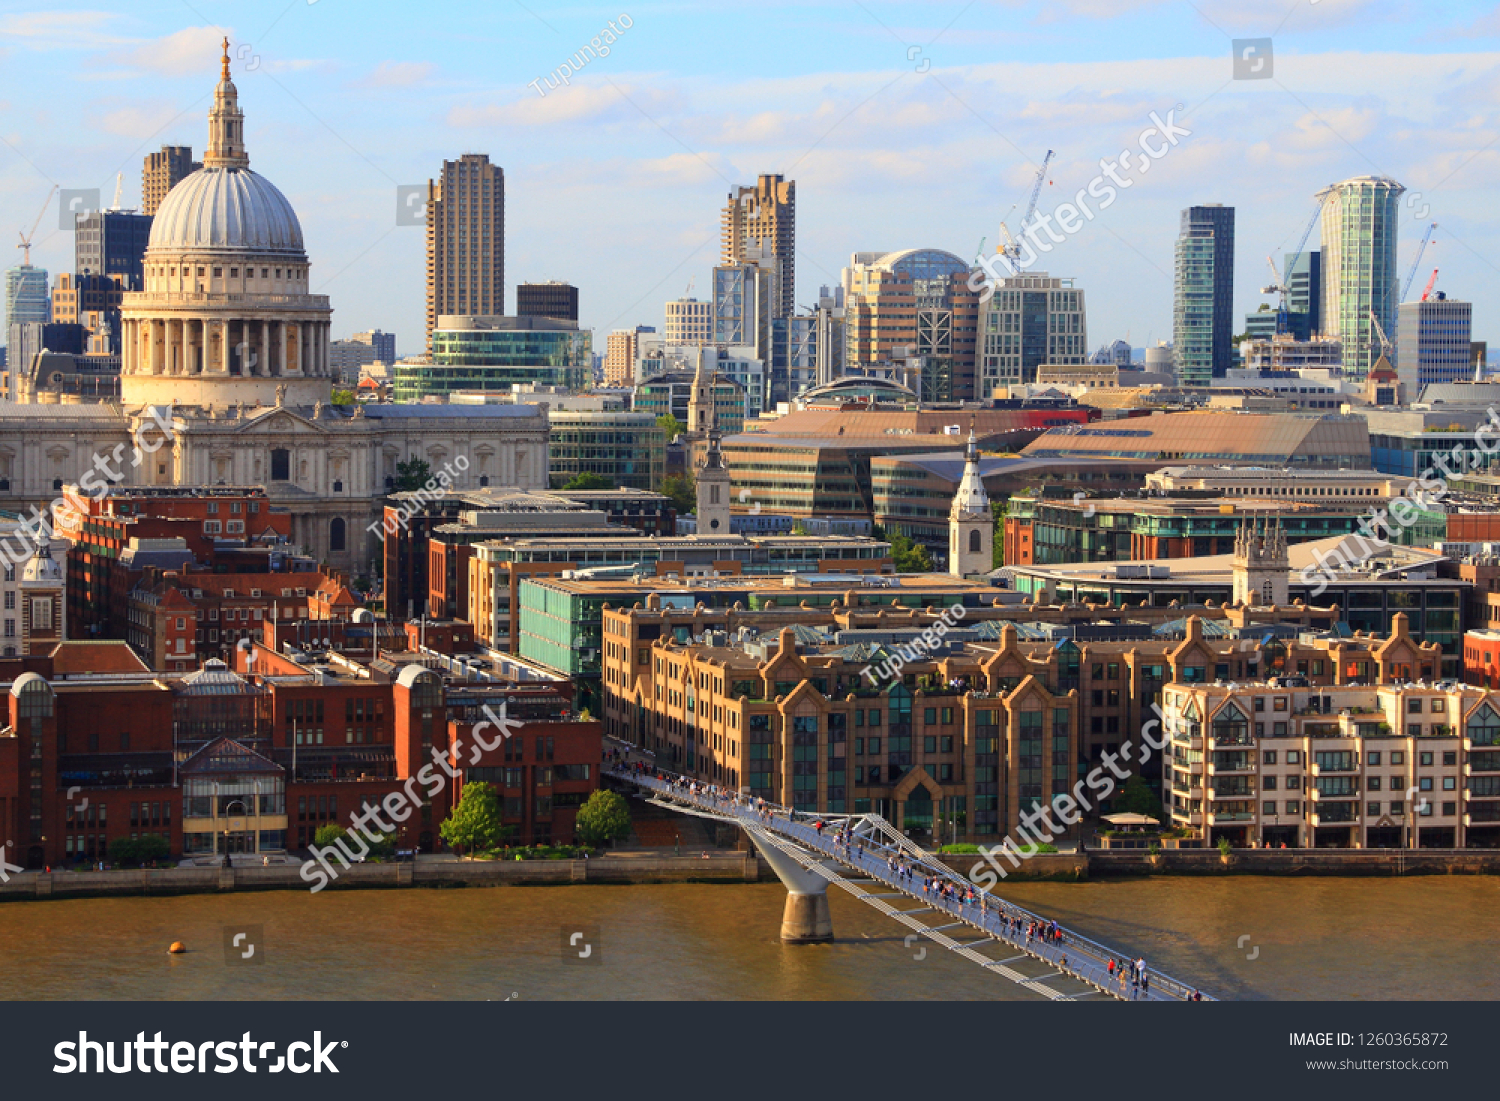 London skyline - sunset city view with Saint Paul's Cathedral. #1260365872